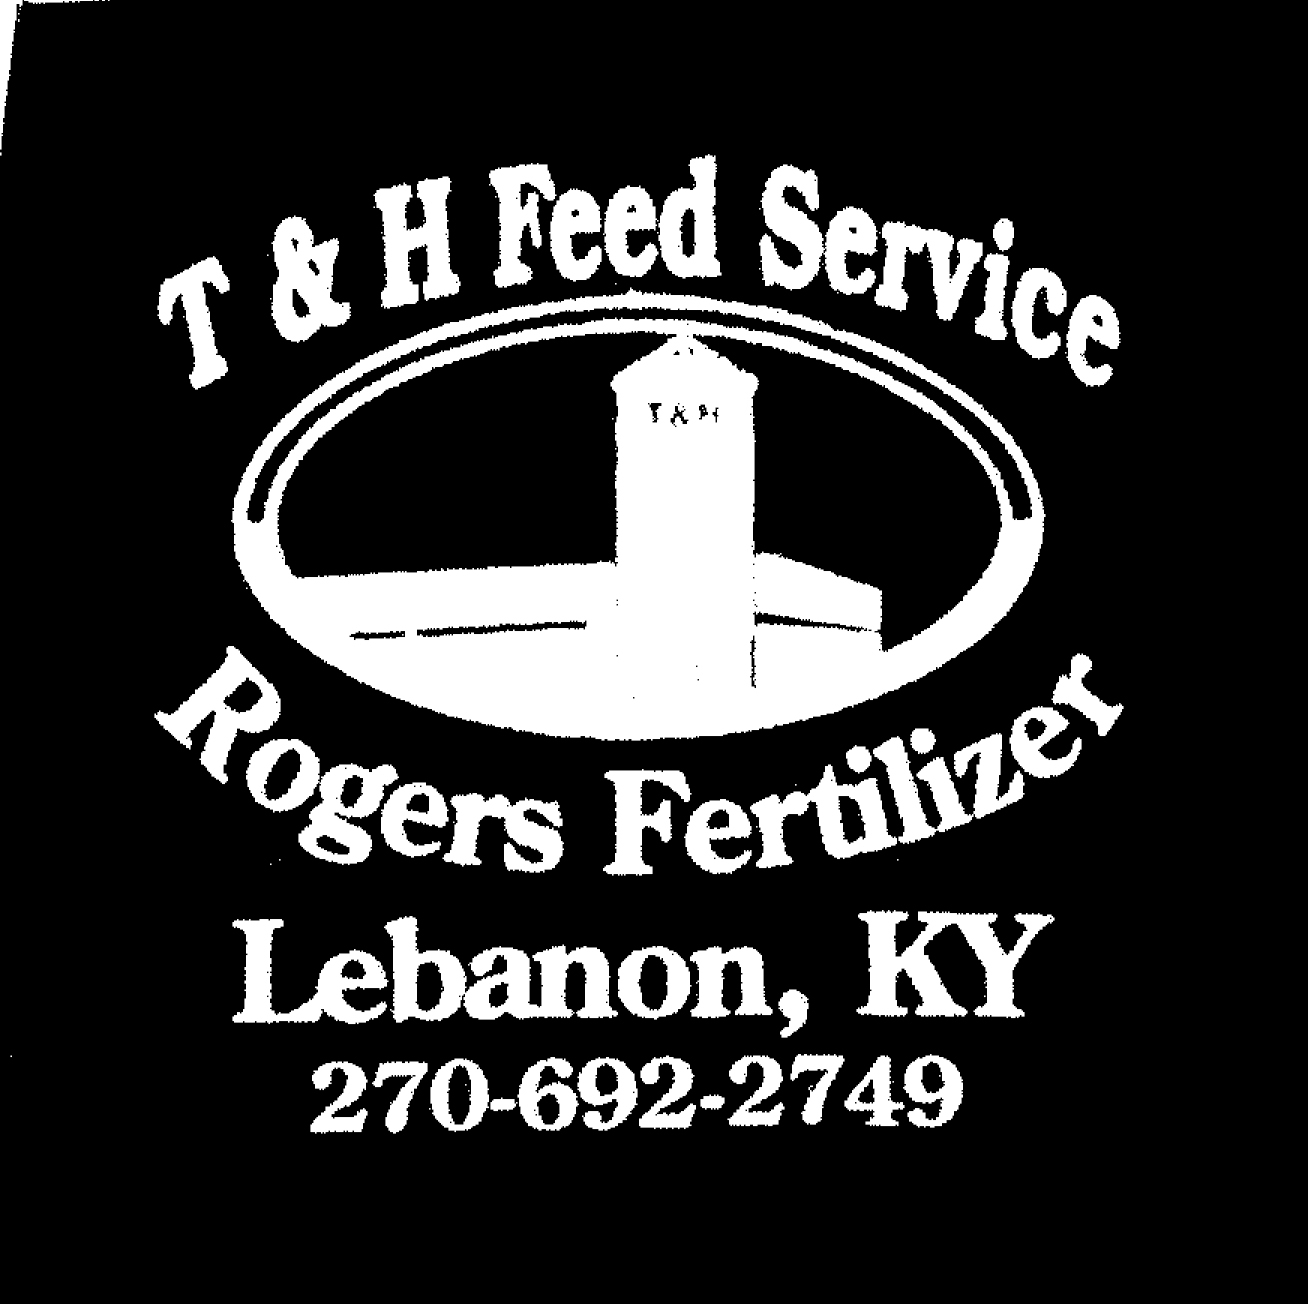 T&H Feed Services, Inc.